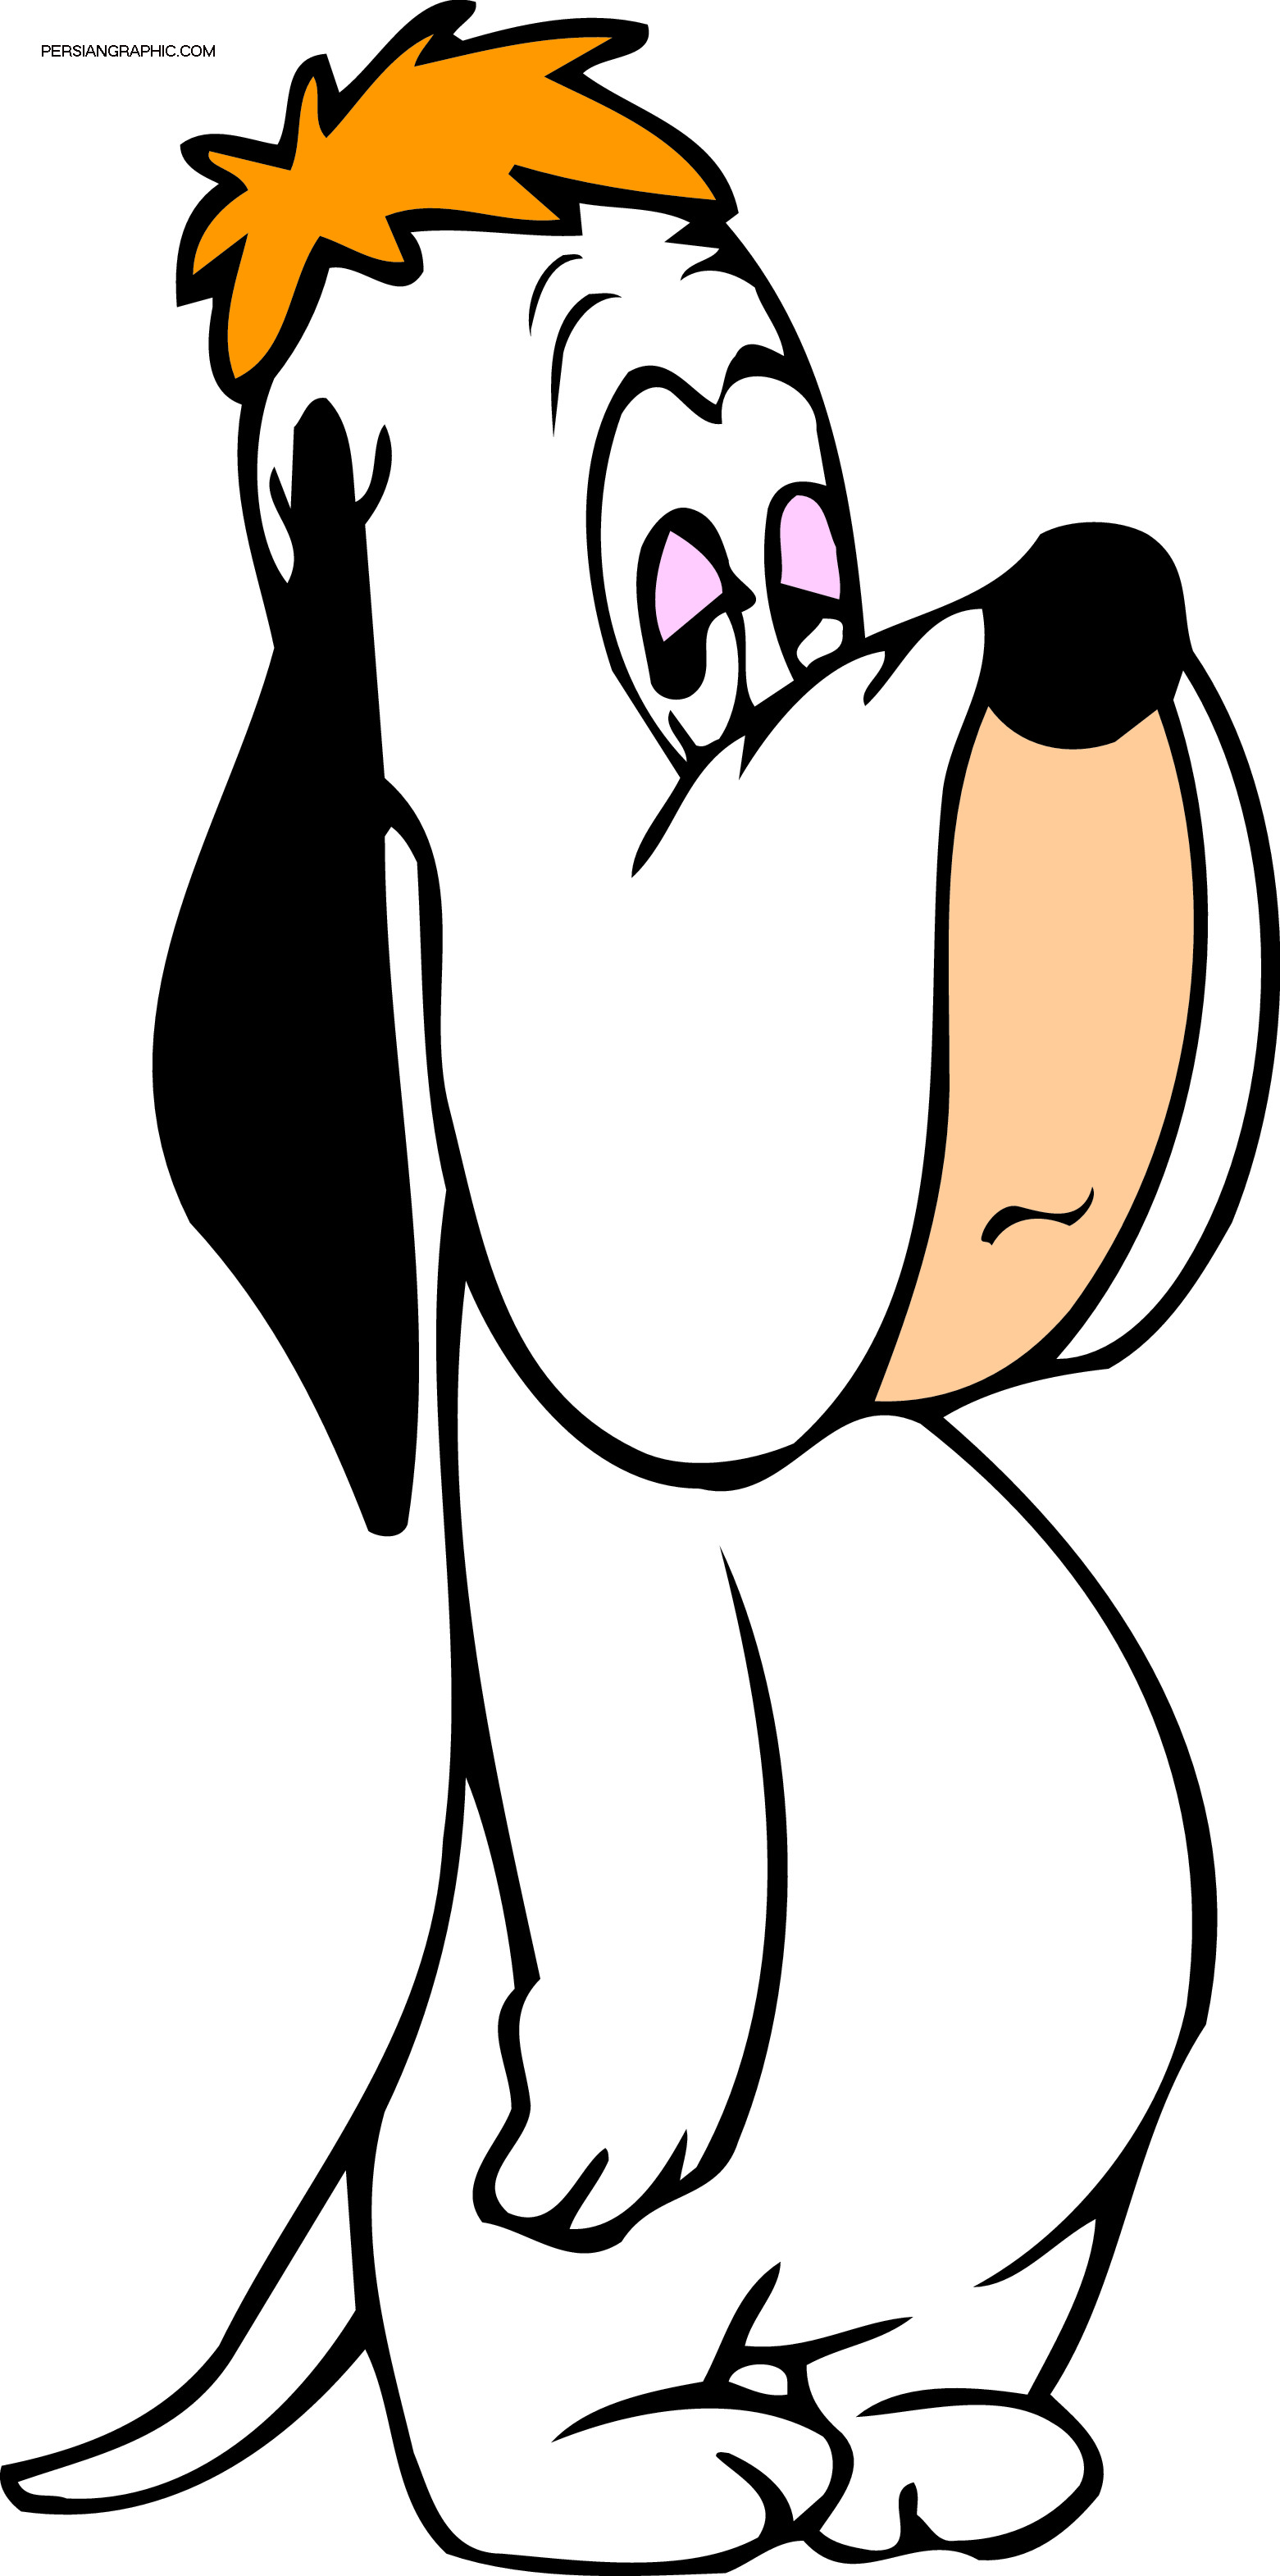 Droopy Dog Quotes. QuotesGram